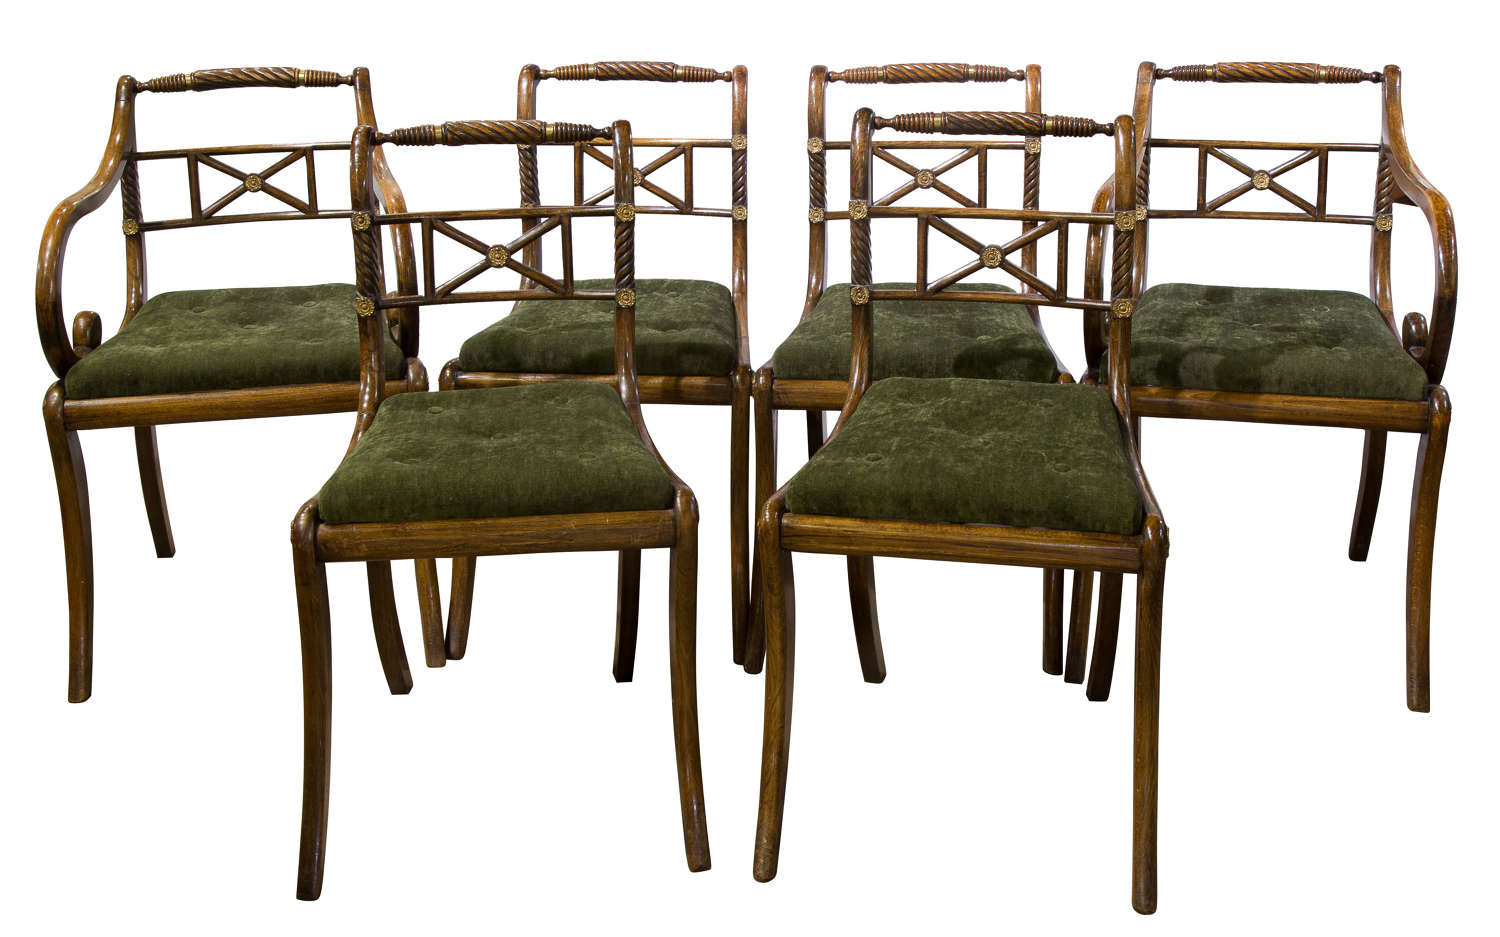 Set of 6 Regency faux rosewood chairs